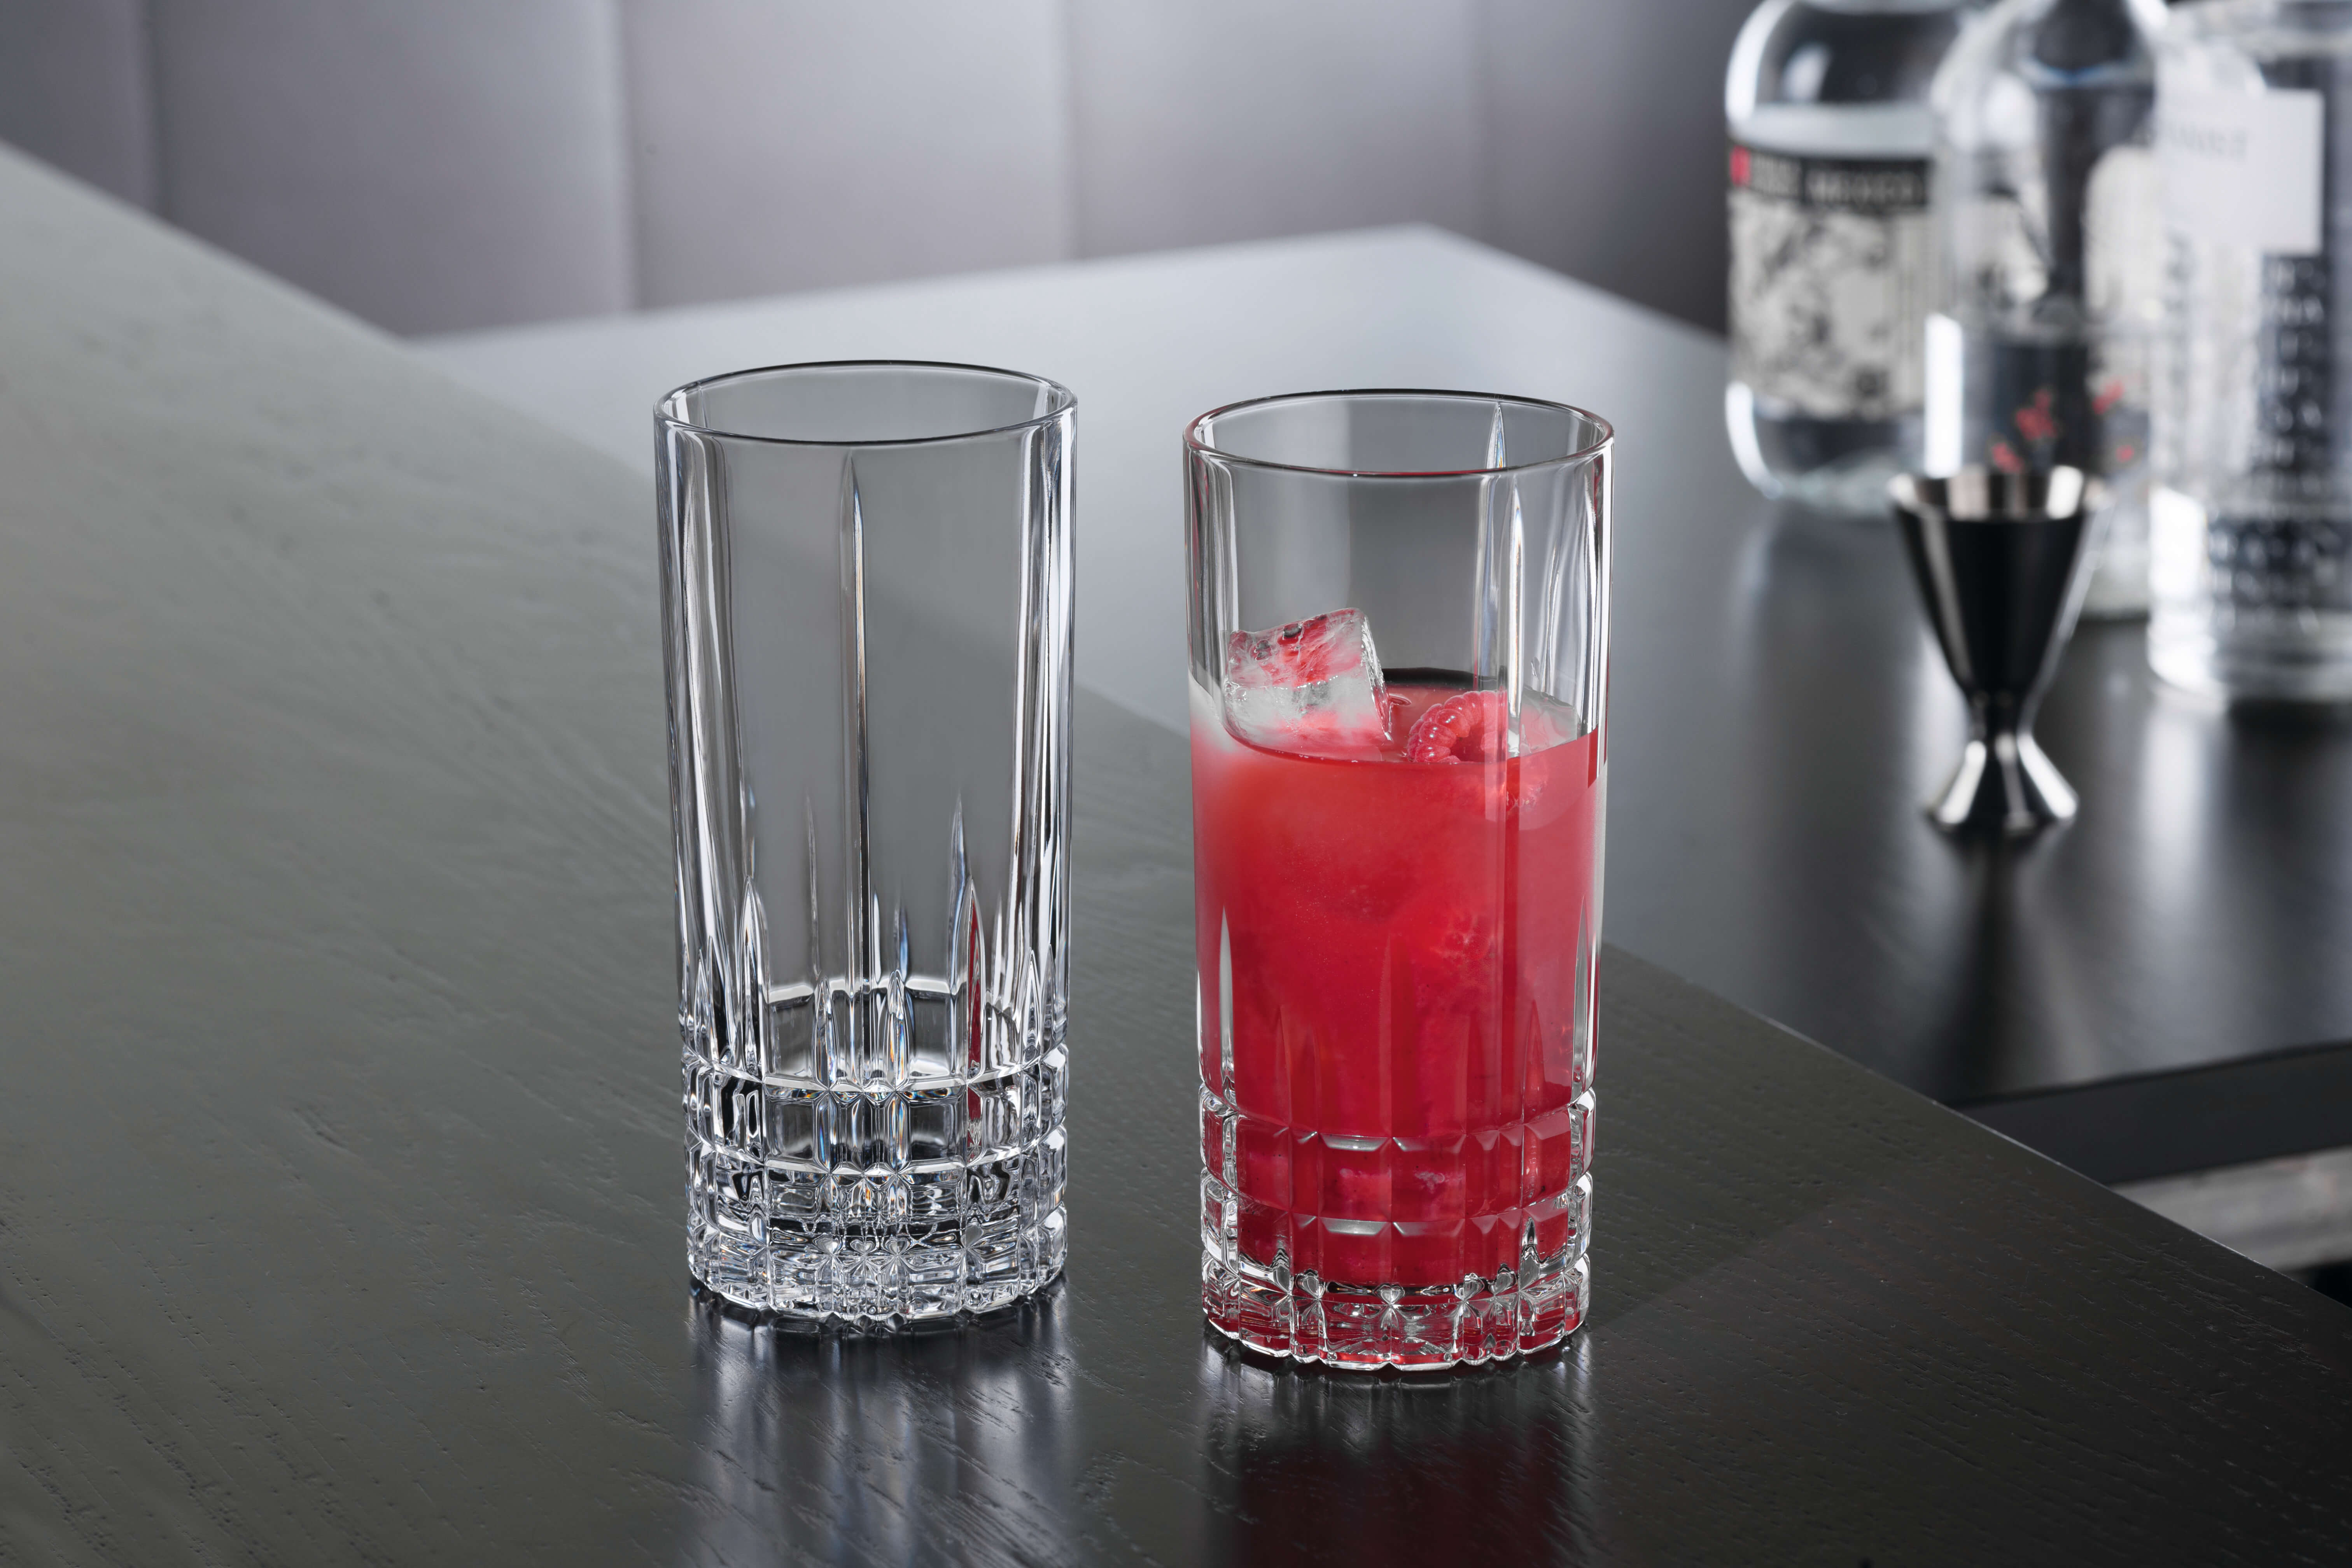 Longdrink glass, Perfect Serve Collection Spiegelau - 350ml